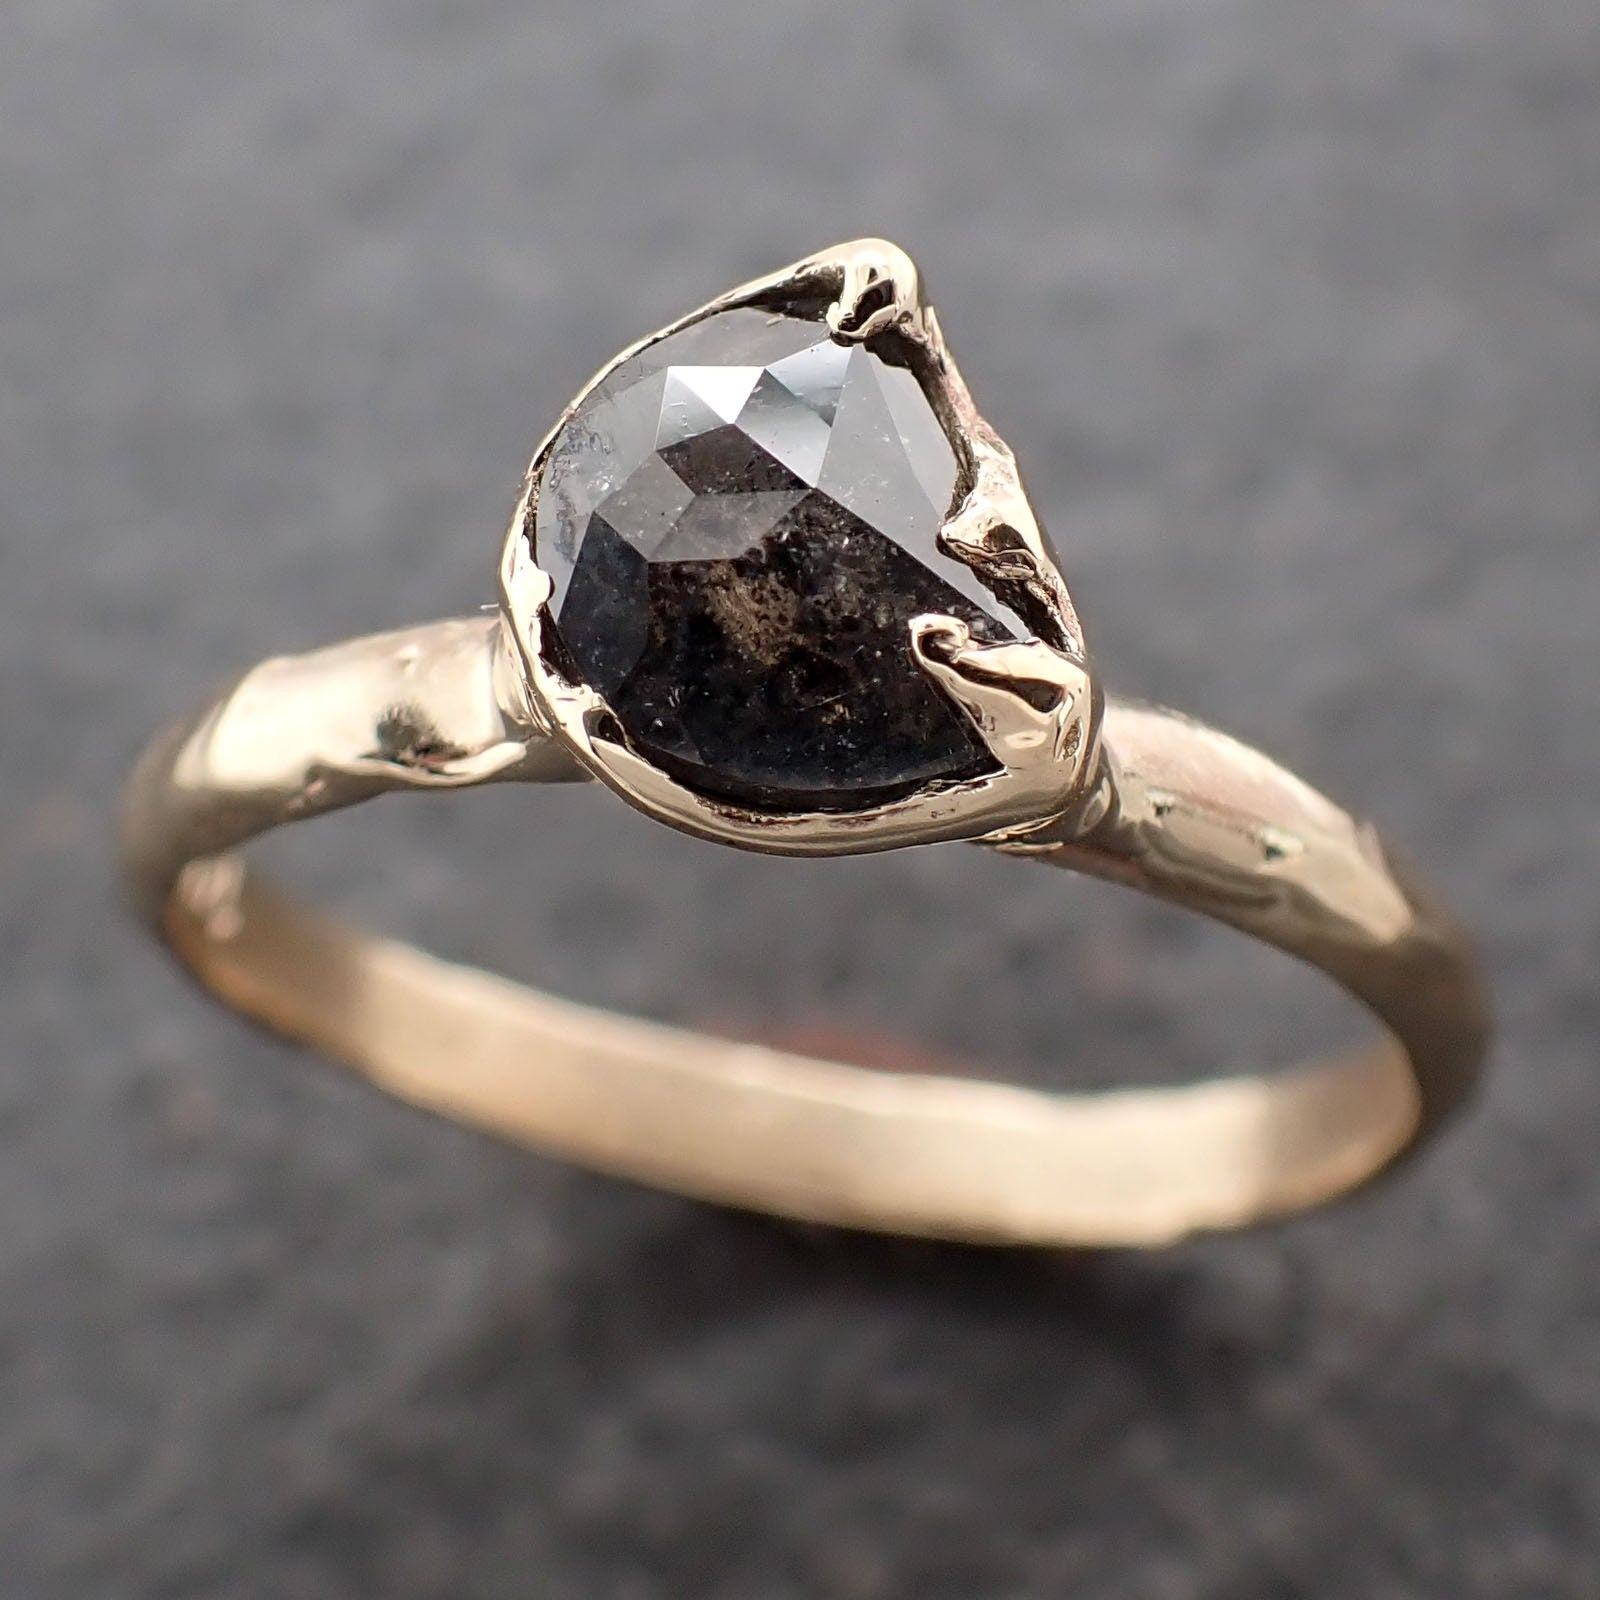 Faceted Fancy cut Salt and pepper Half Moon Diamond Engagement 14k Gold Solitaire Wedding Ring byAngeline 3202